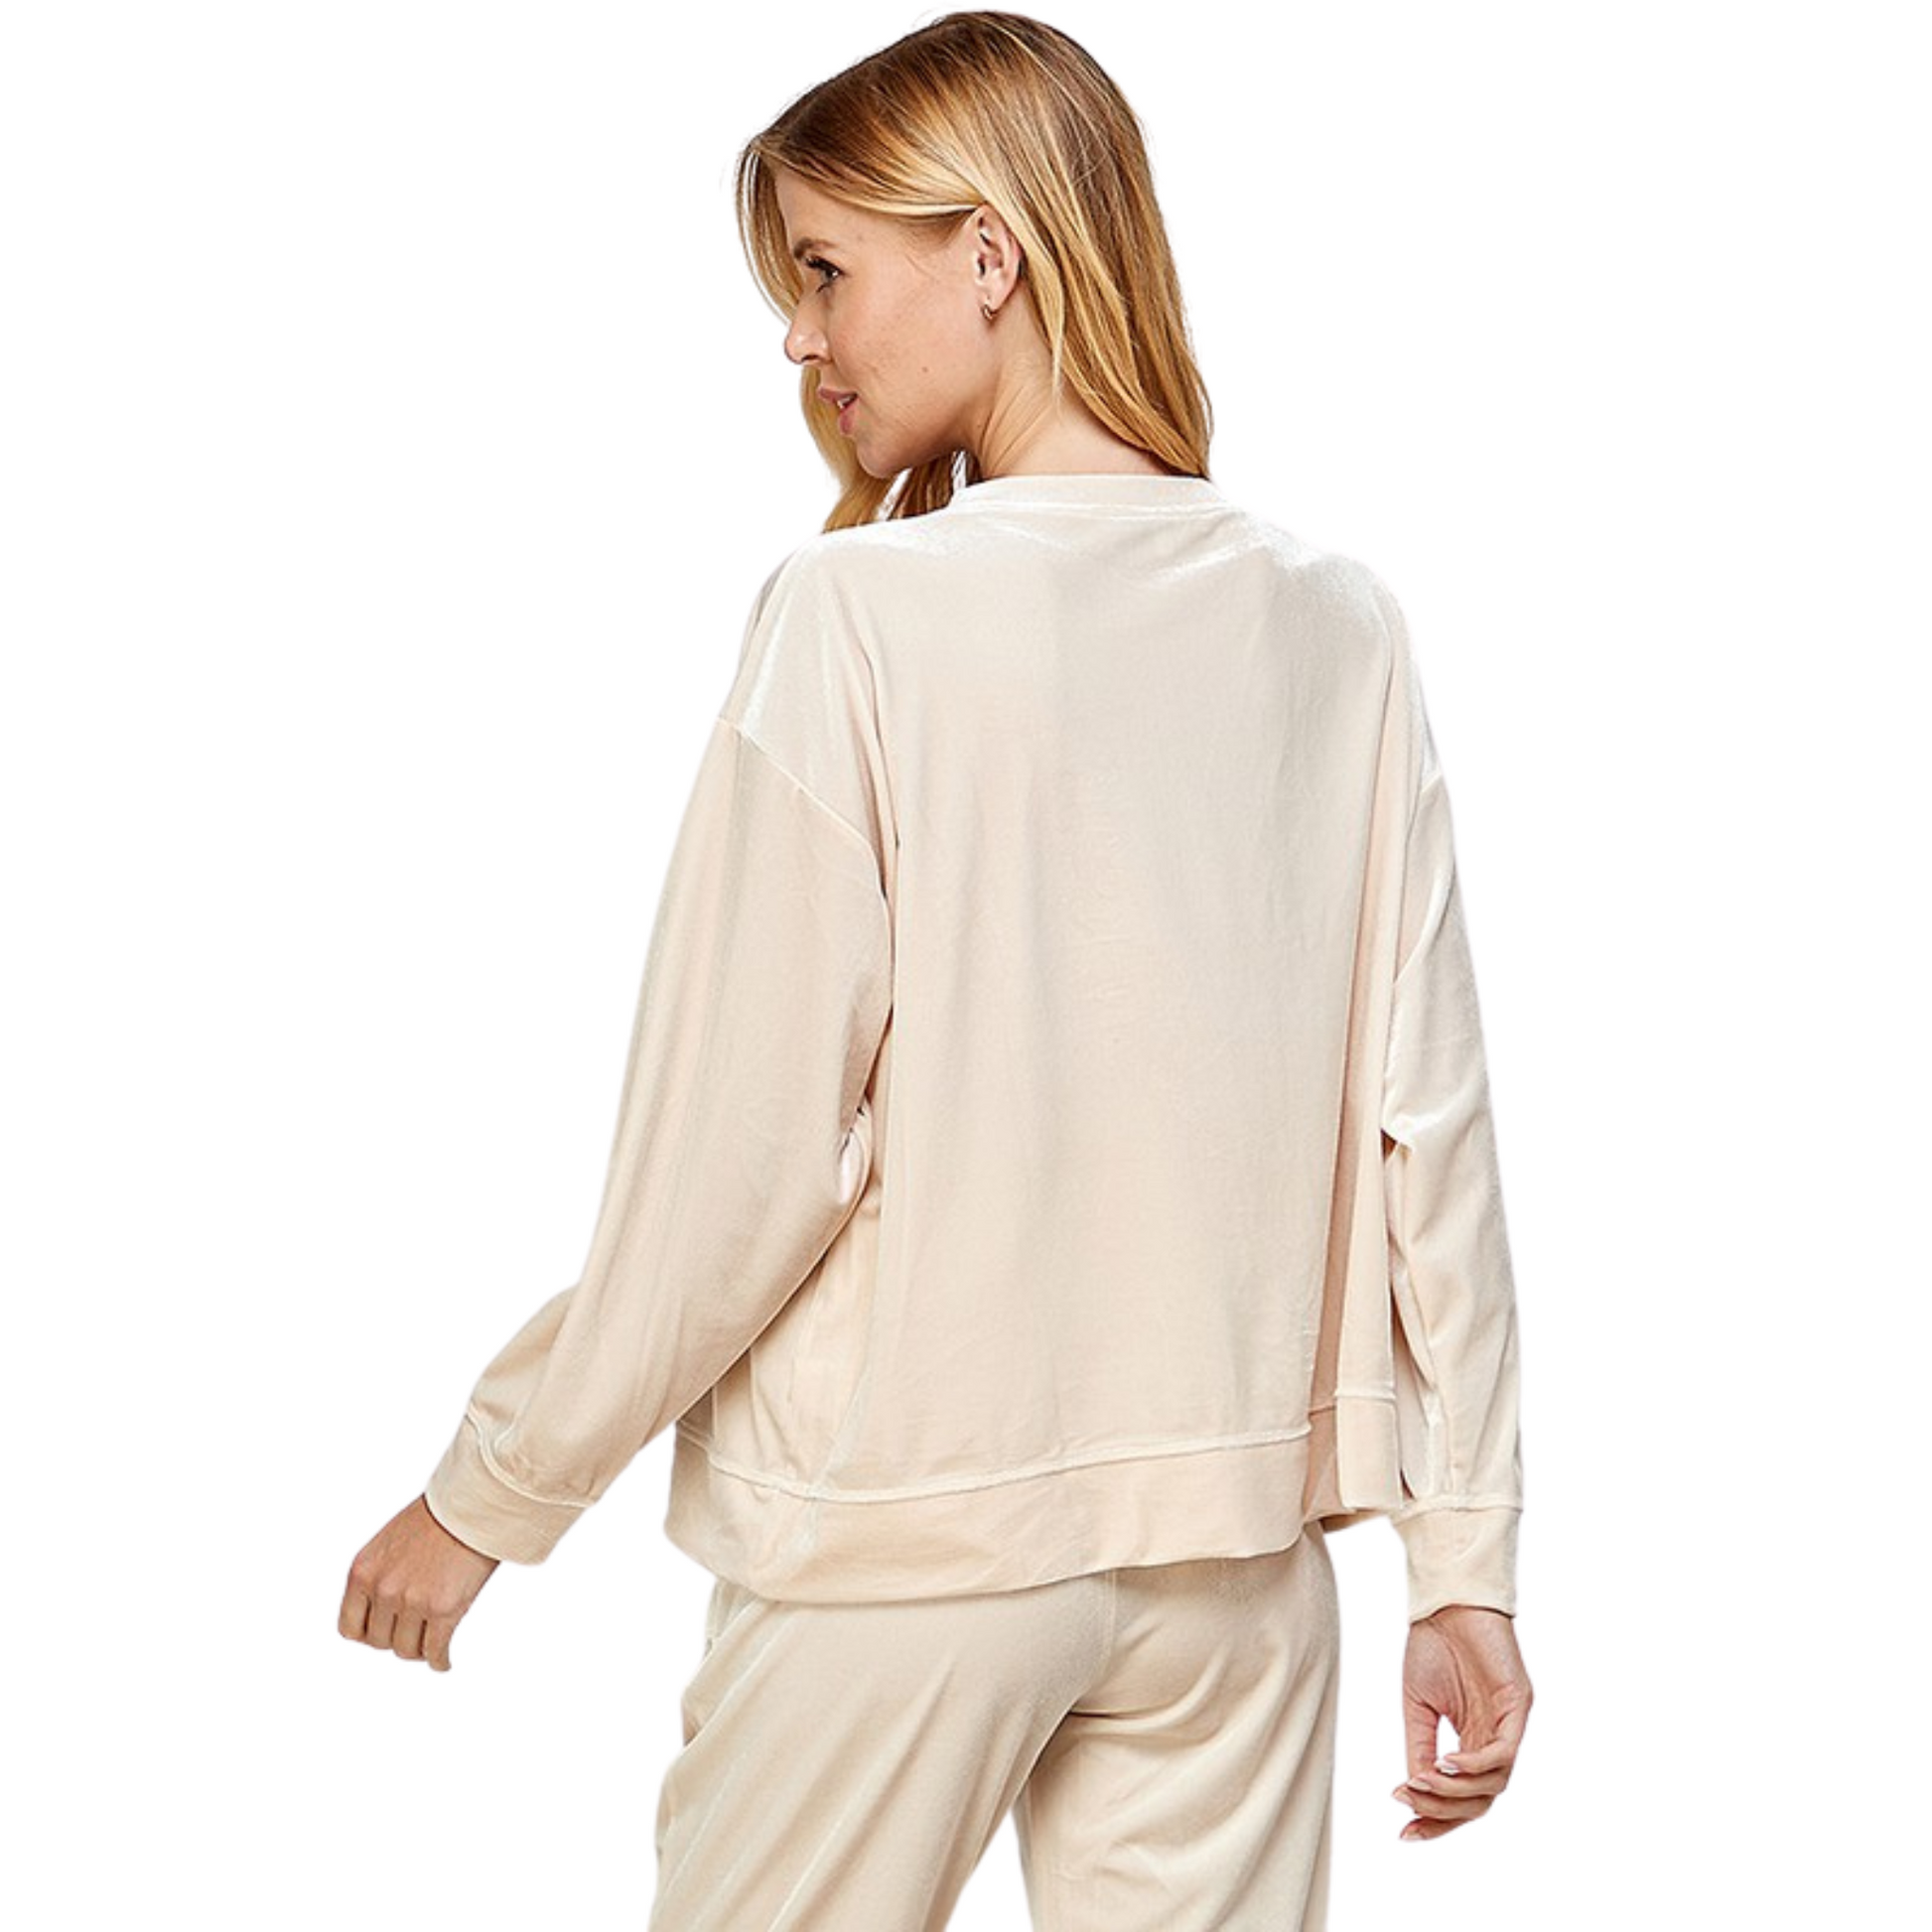 This Velvet Loungewear Top is perfect for cozy lounging. Crafted from a luxurious velvet fabric, this top features a cream color and a comfy fit that feels like a dream. Wear this top for a fashionable and comfortable look.